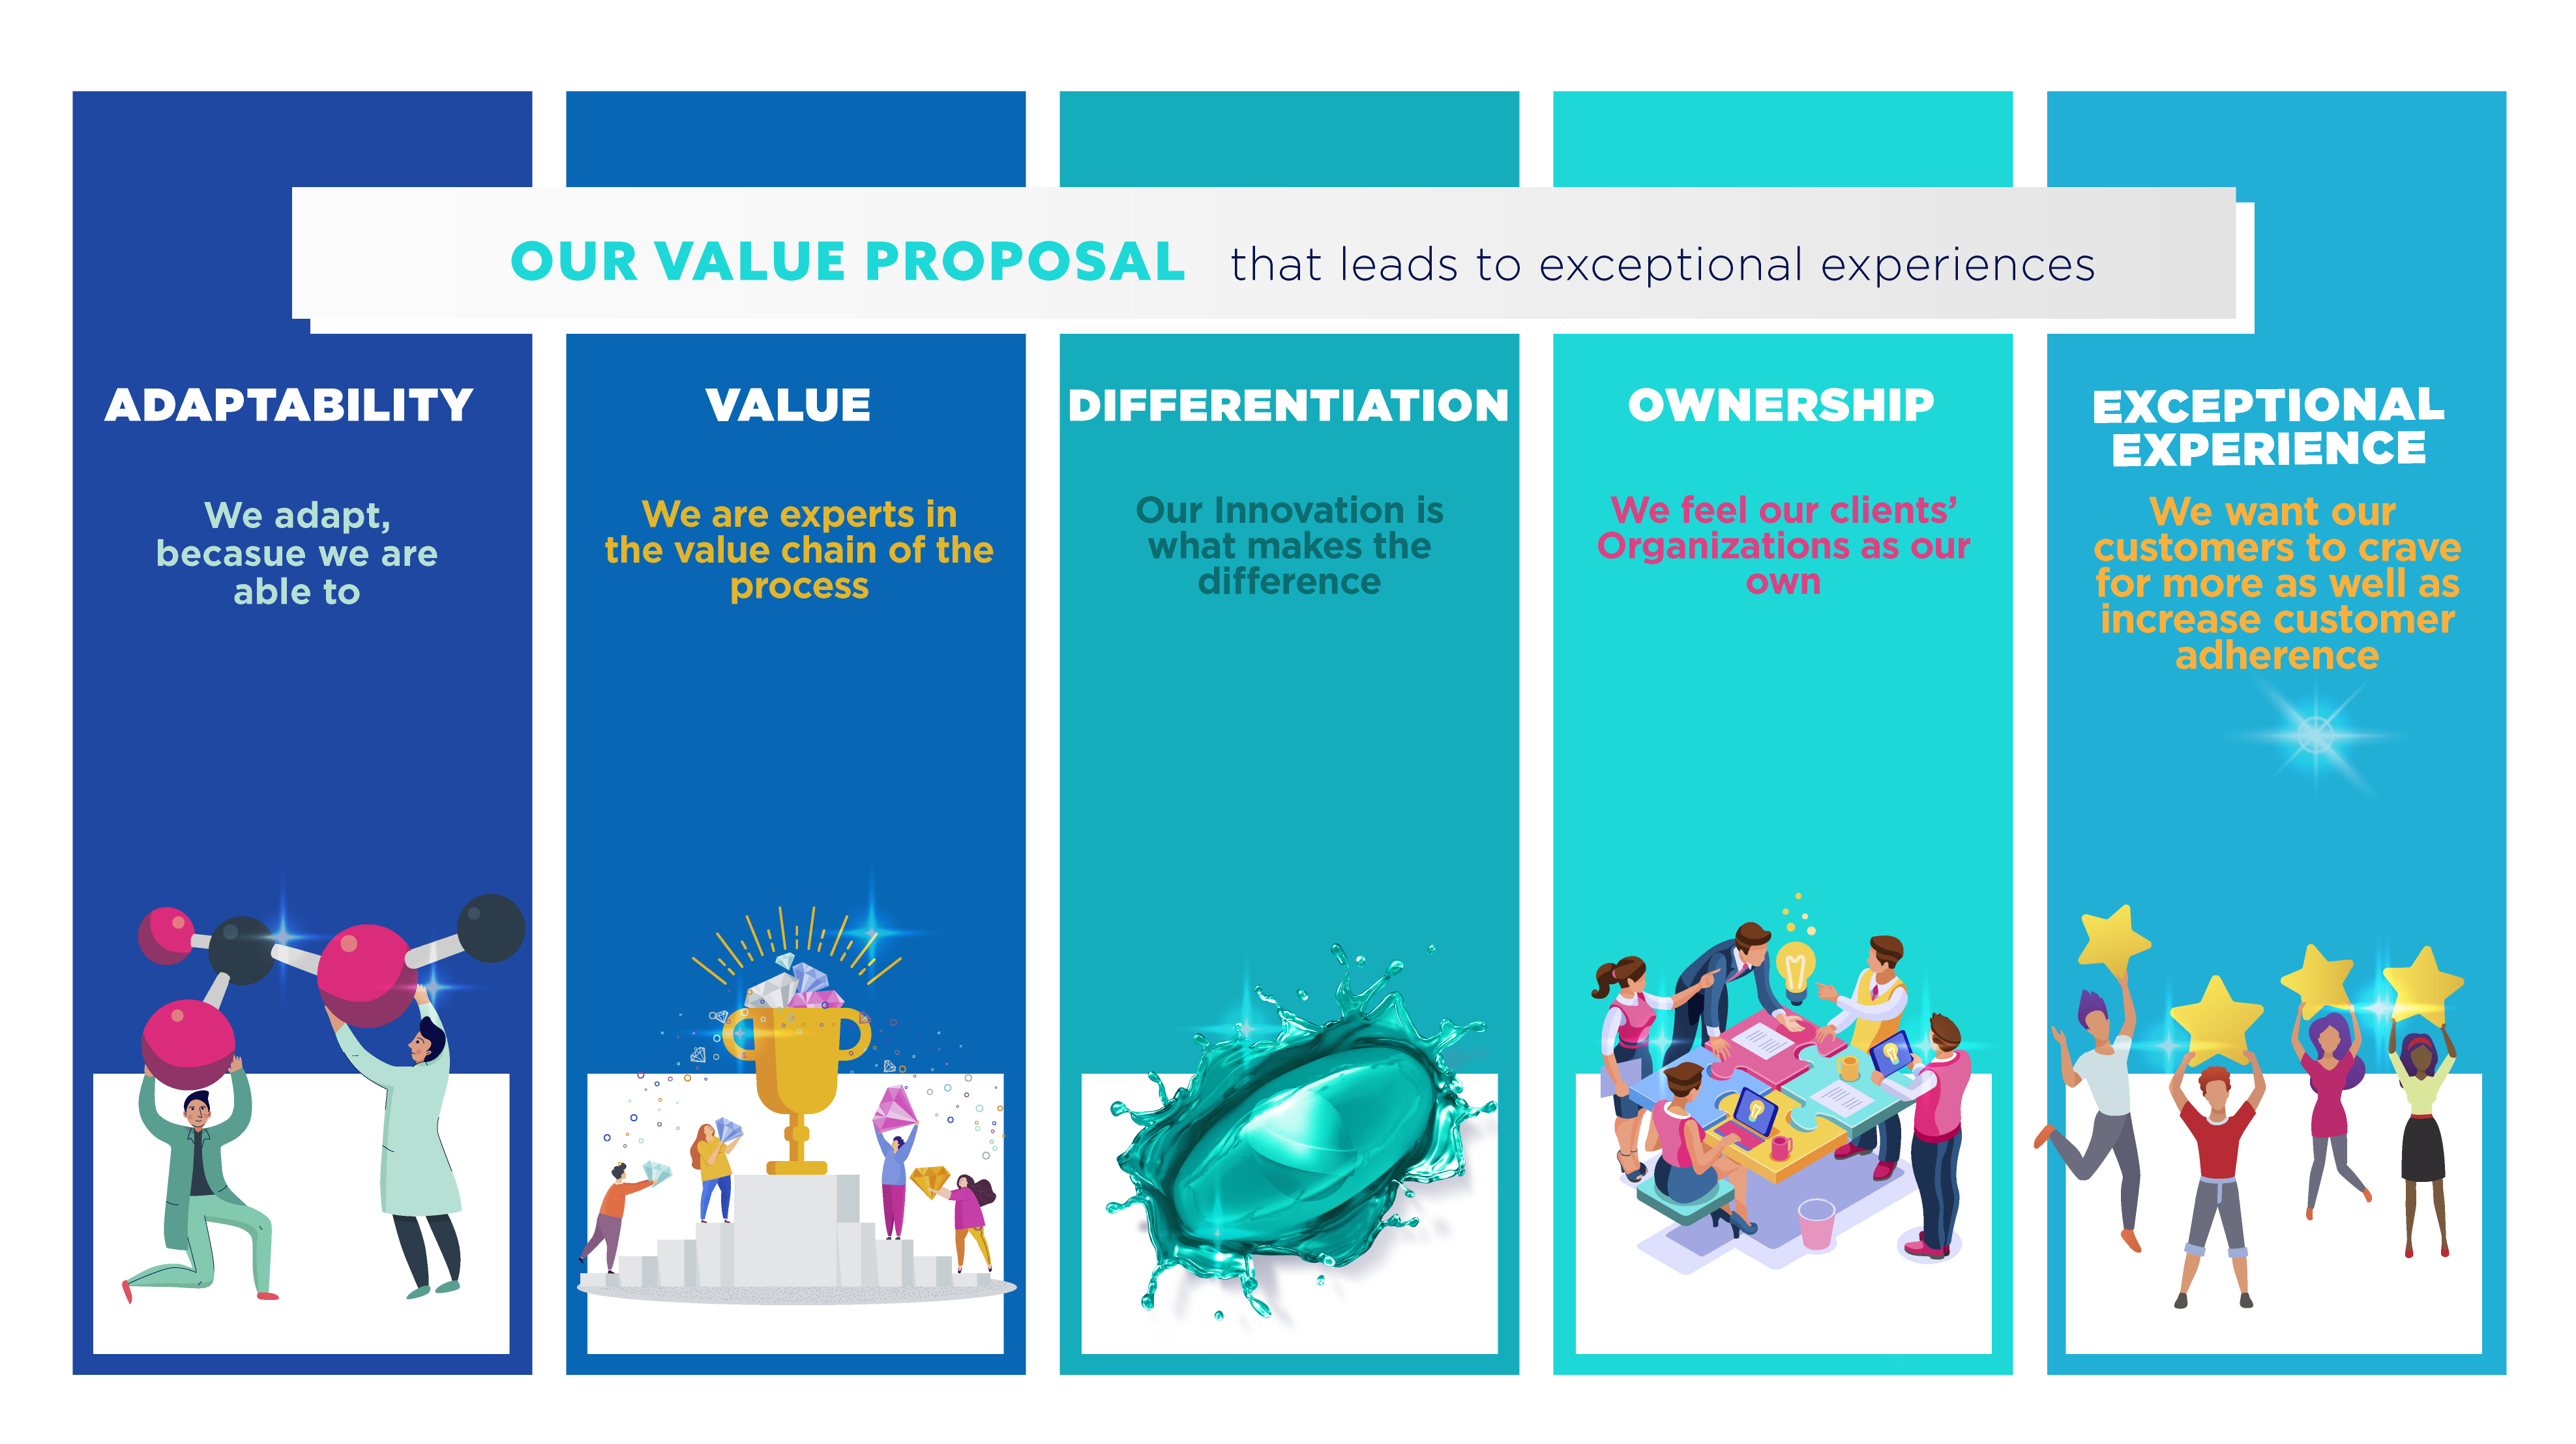 Our Value Proposal